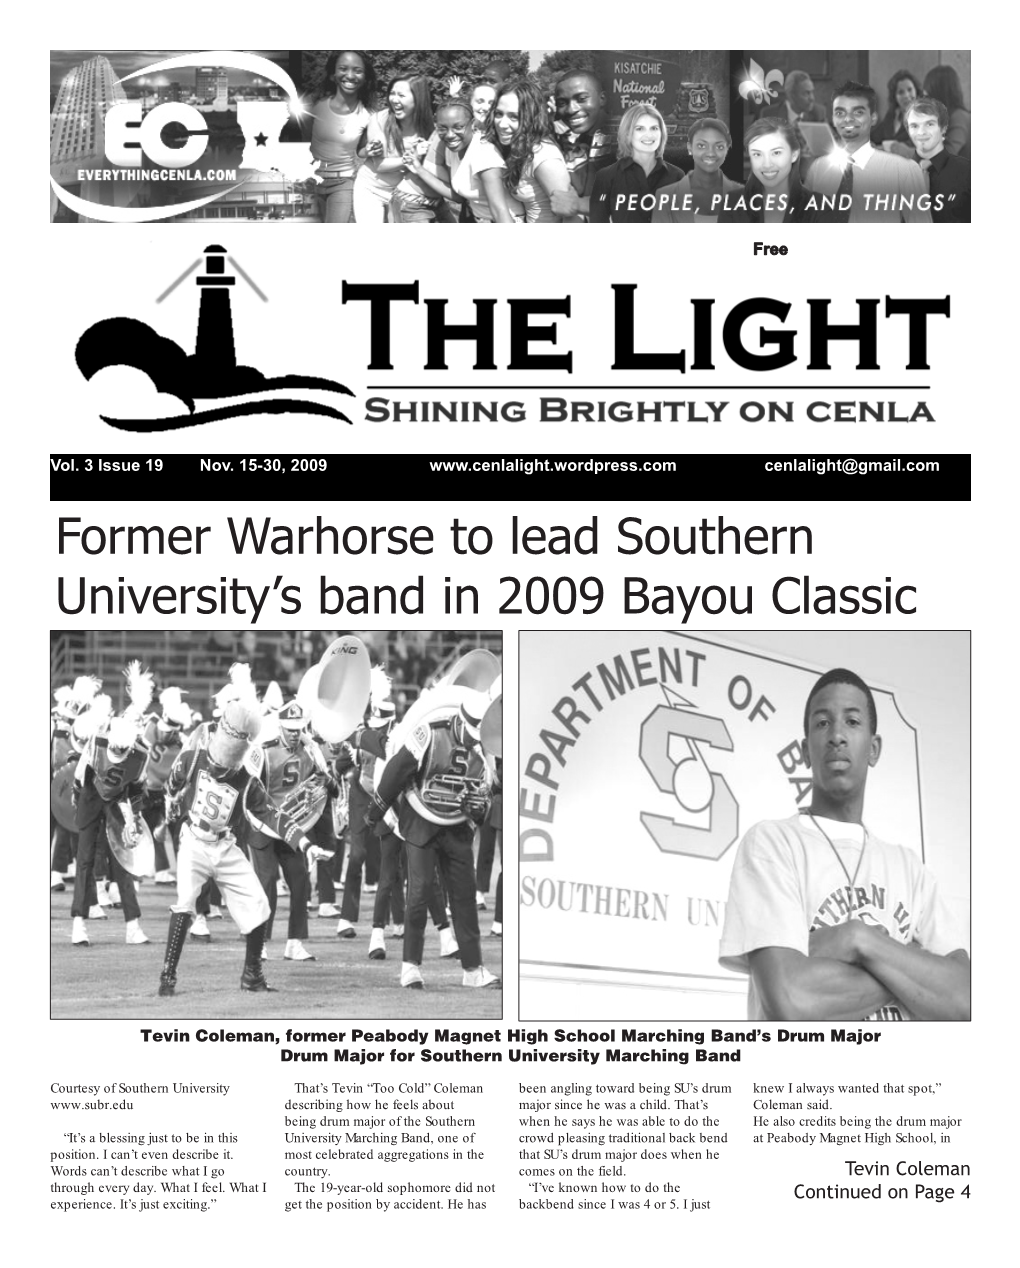 Former Warhorse to Lead Southern University's Band in 2009 Bayou